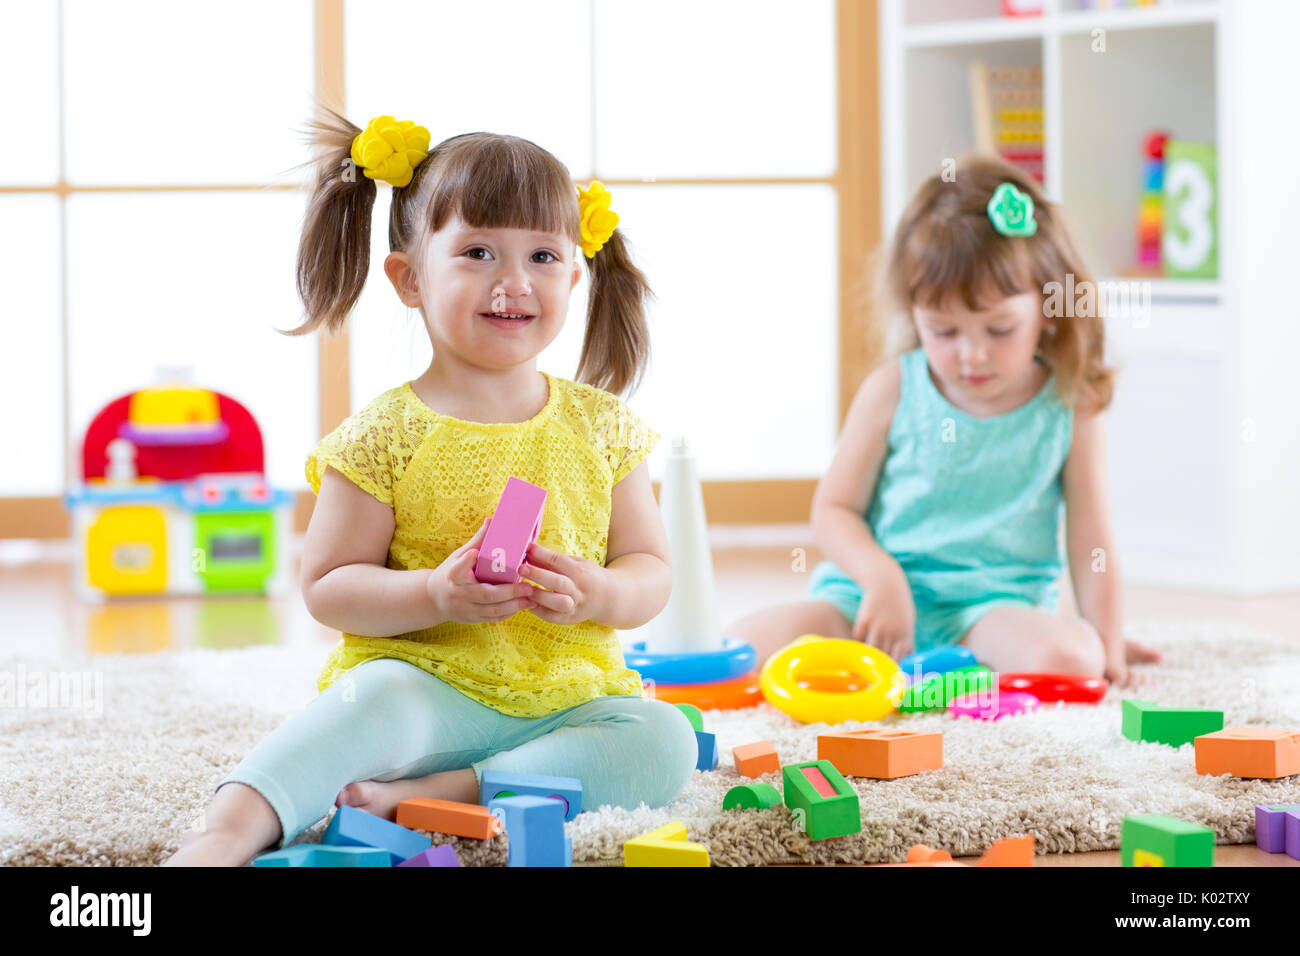 Children playing together. Toddler kids play with blocks. Educational toys for preschool and kindergarten child. Little girls build pyramid toys at home or daycare. Stock Photo